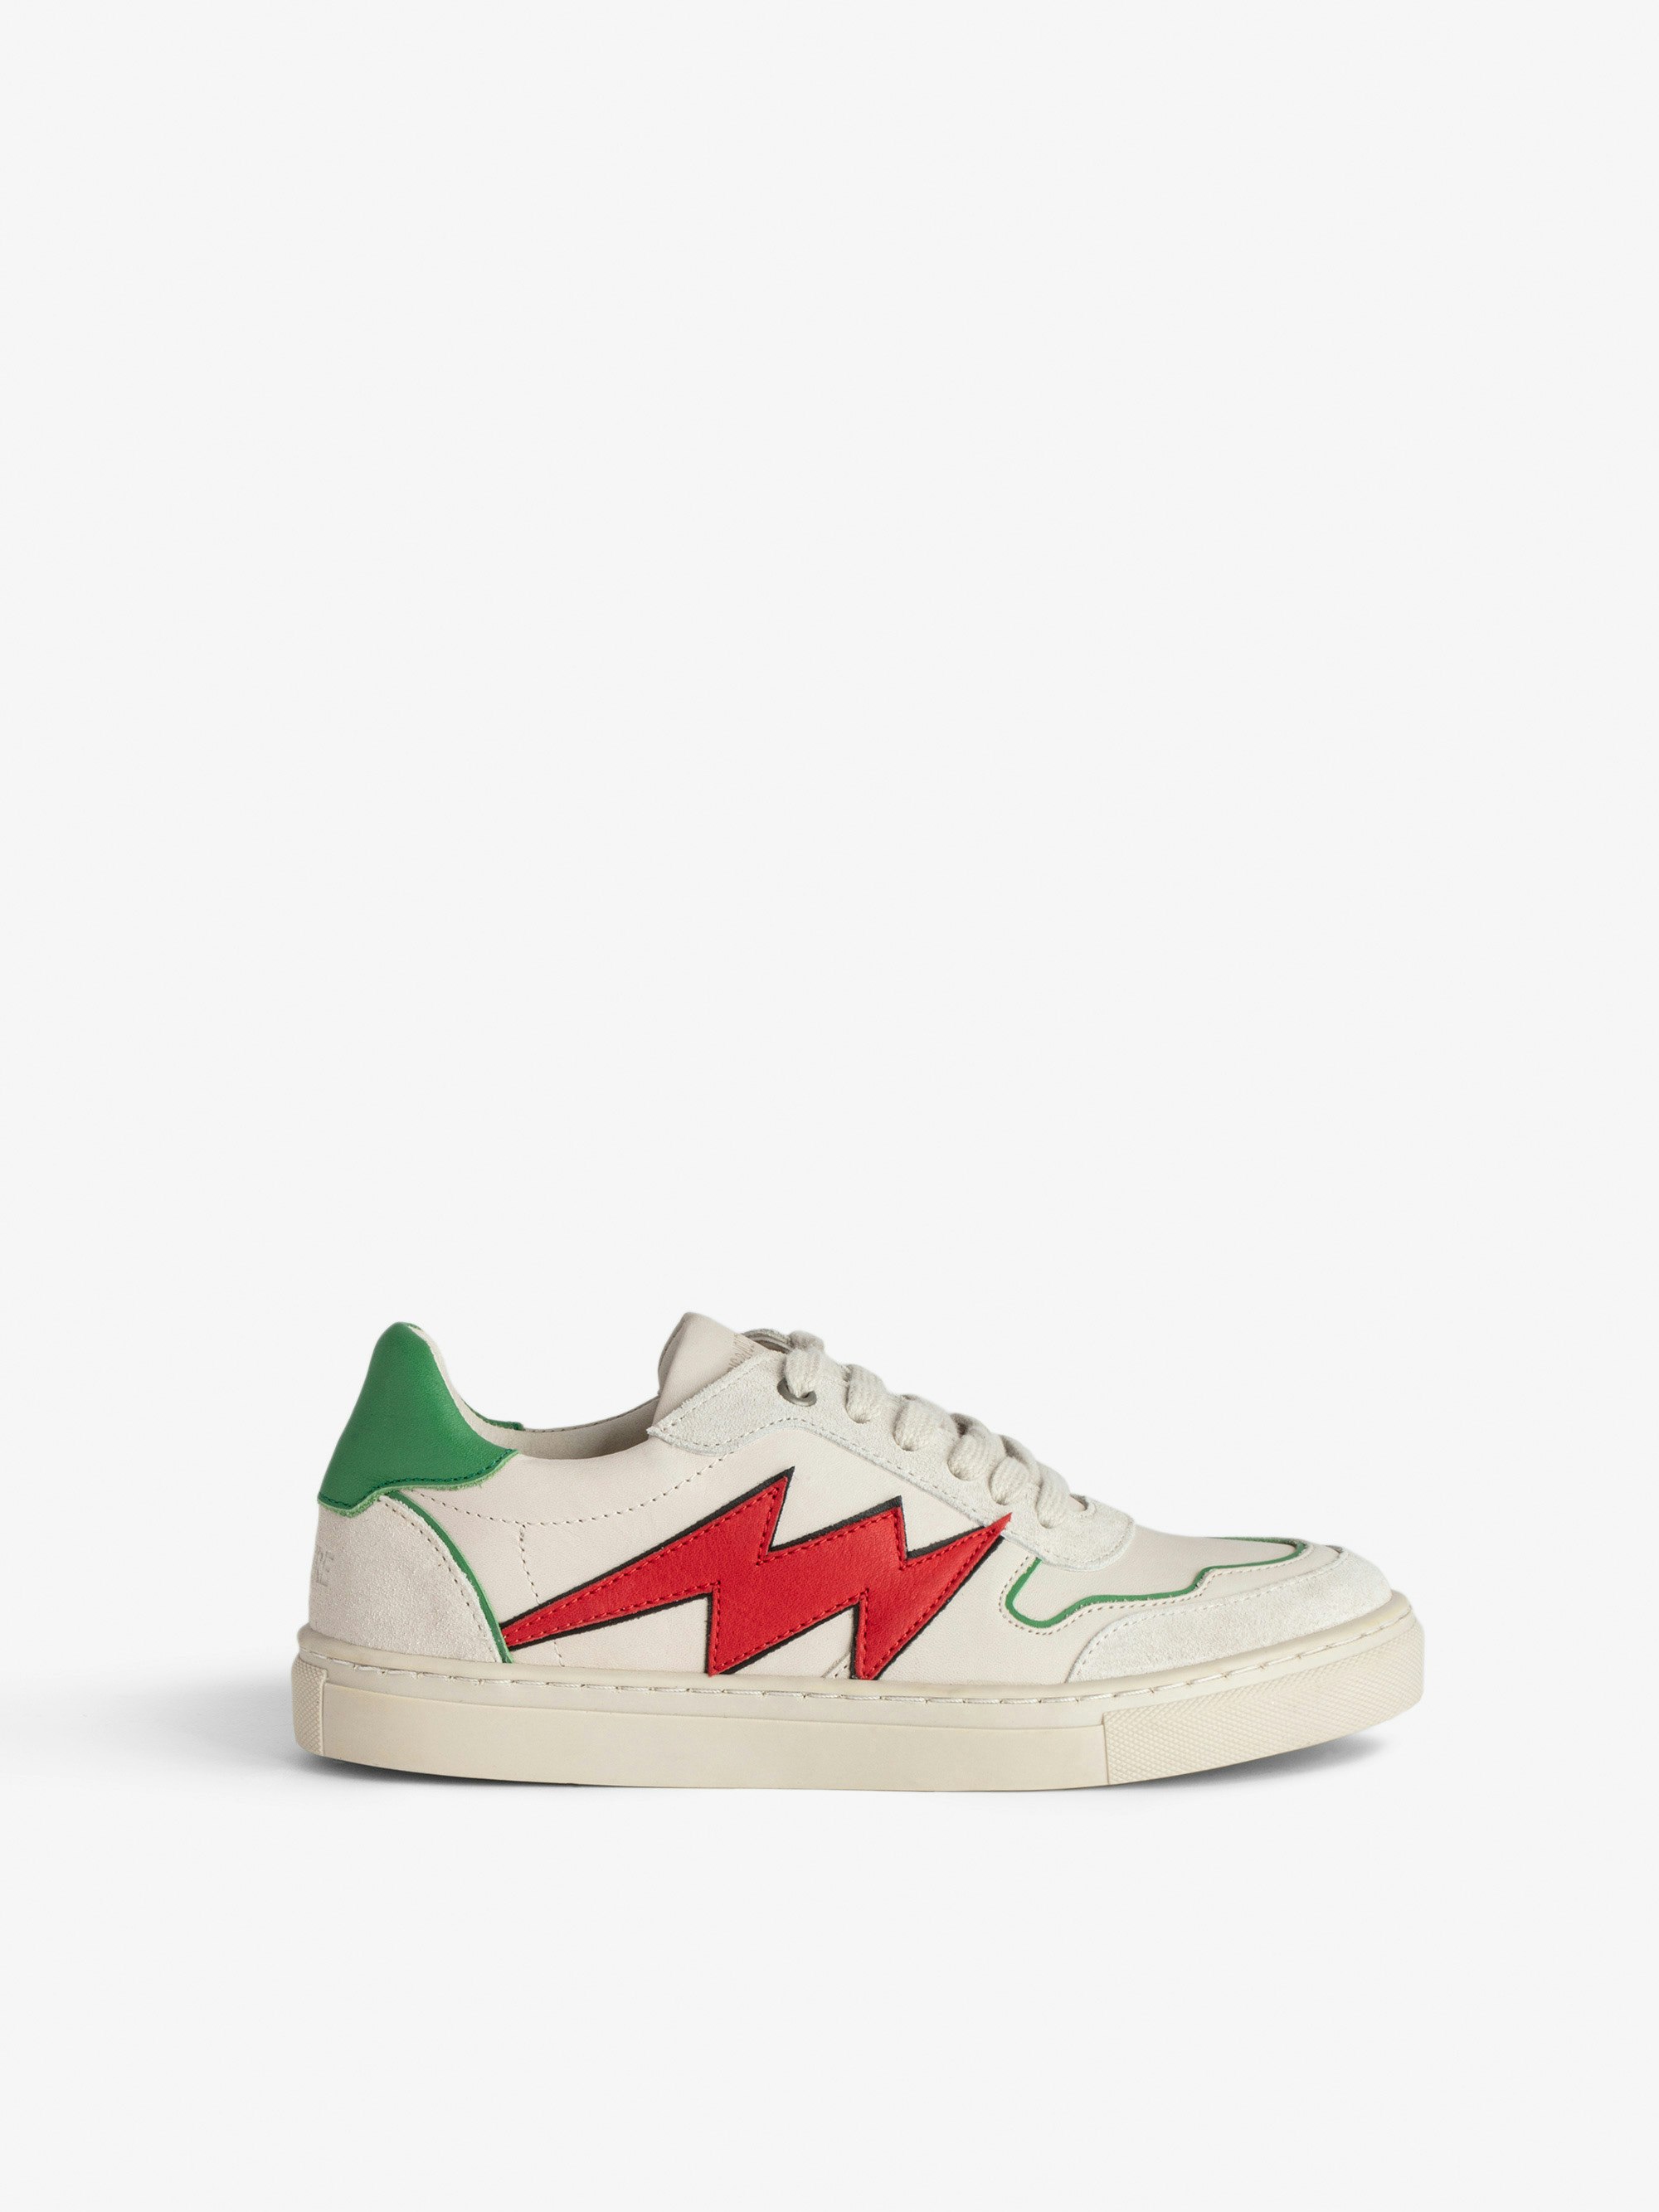 ZV1747 La Flash Boys’ Low-Top Trainers - Boys’ white leather and suede low-top trainers with contrasting lightning bolt.